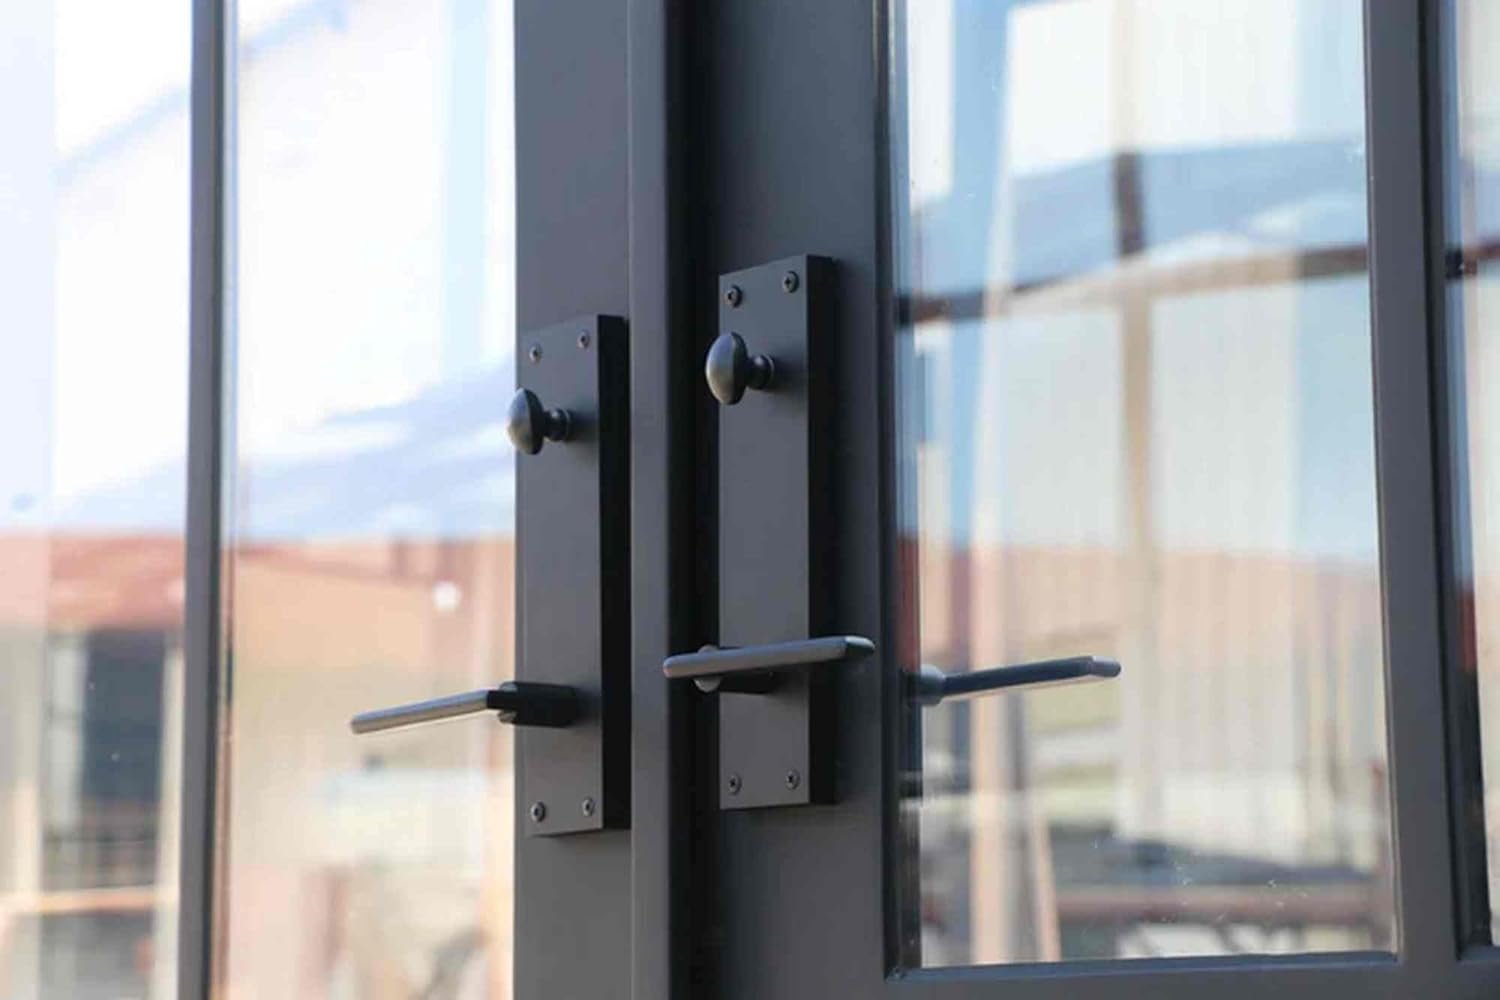 HR 72x81 Matte Black French Iron Double Door Made of Steel | 3-Lite with kickplate Left outswing Entryway | Complete with Handle and Lock | Modern Front View Design.